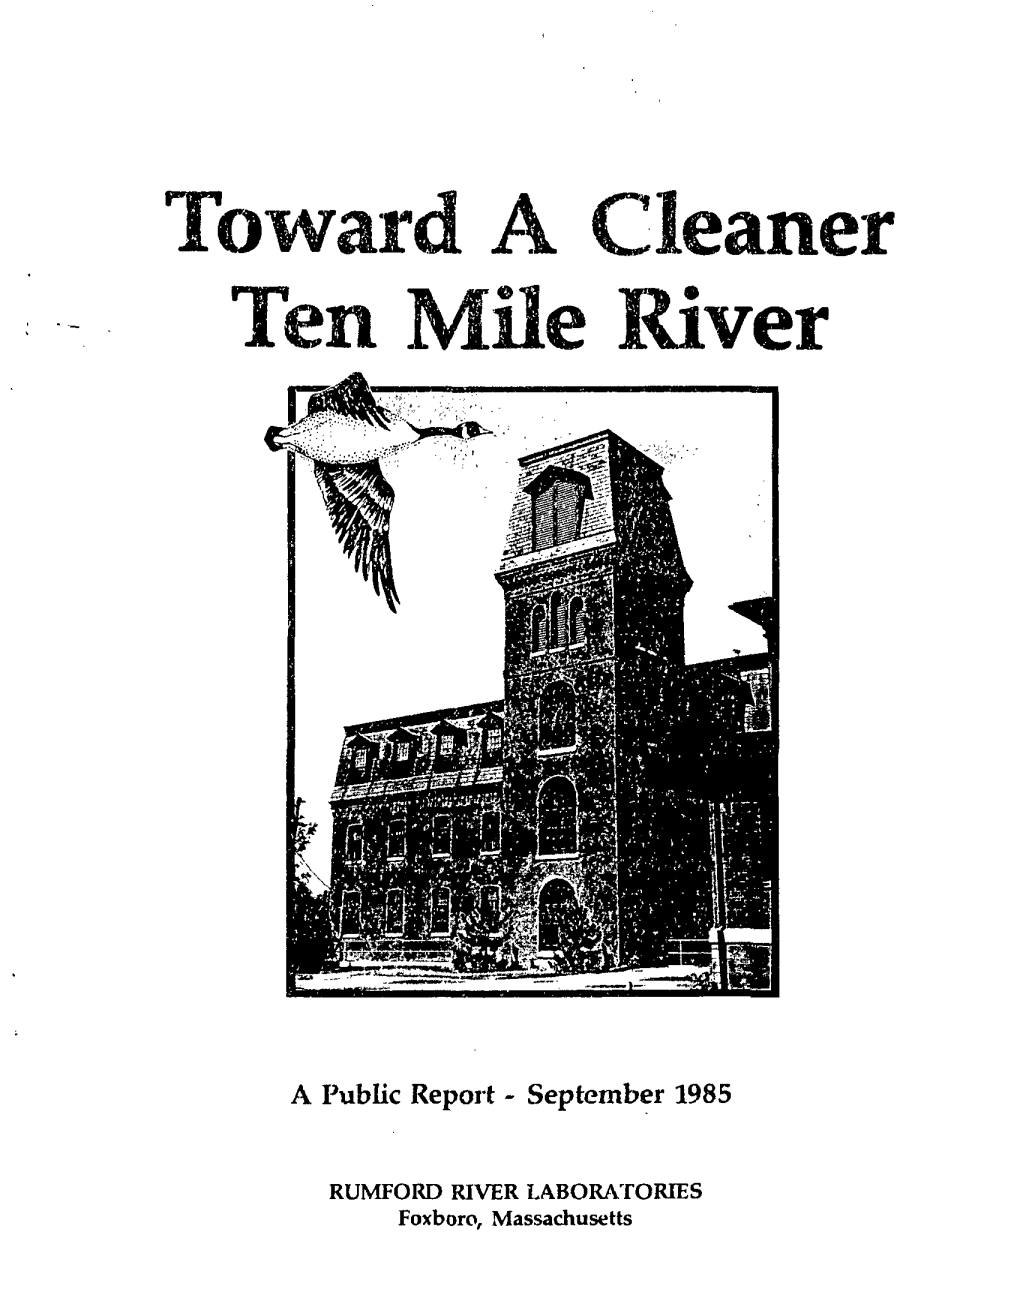 Toward a Cleaner Ten Mile River